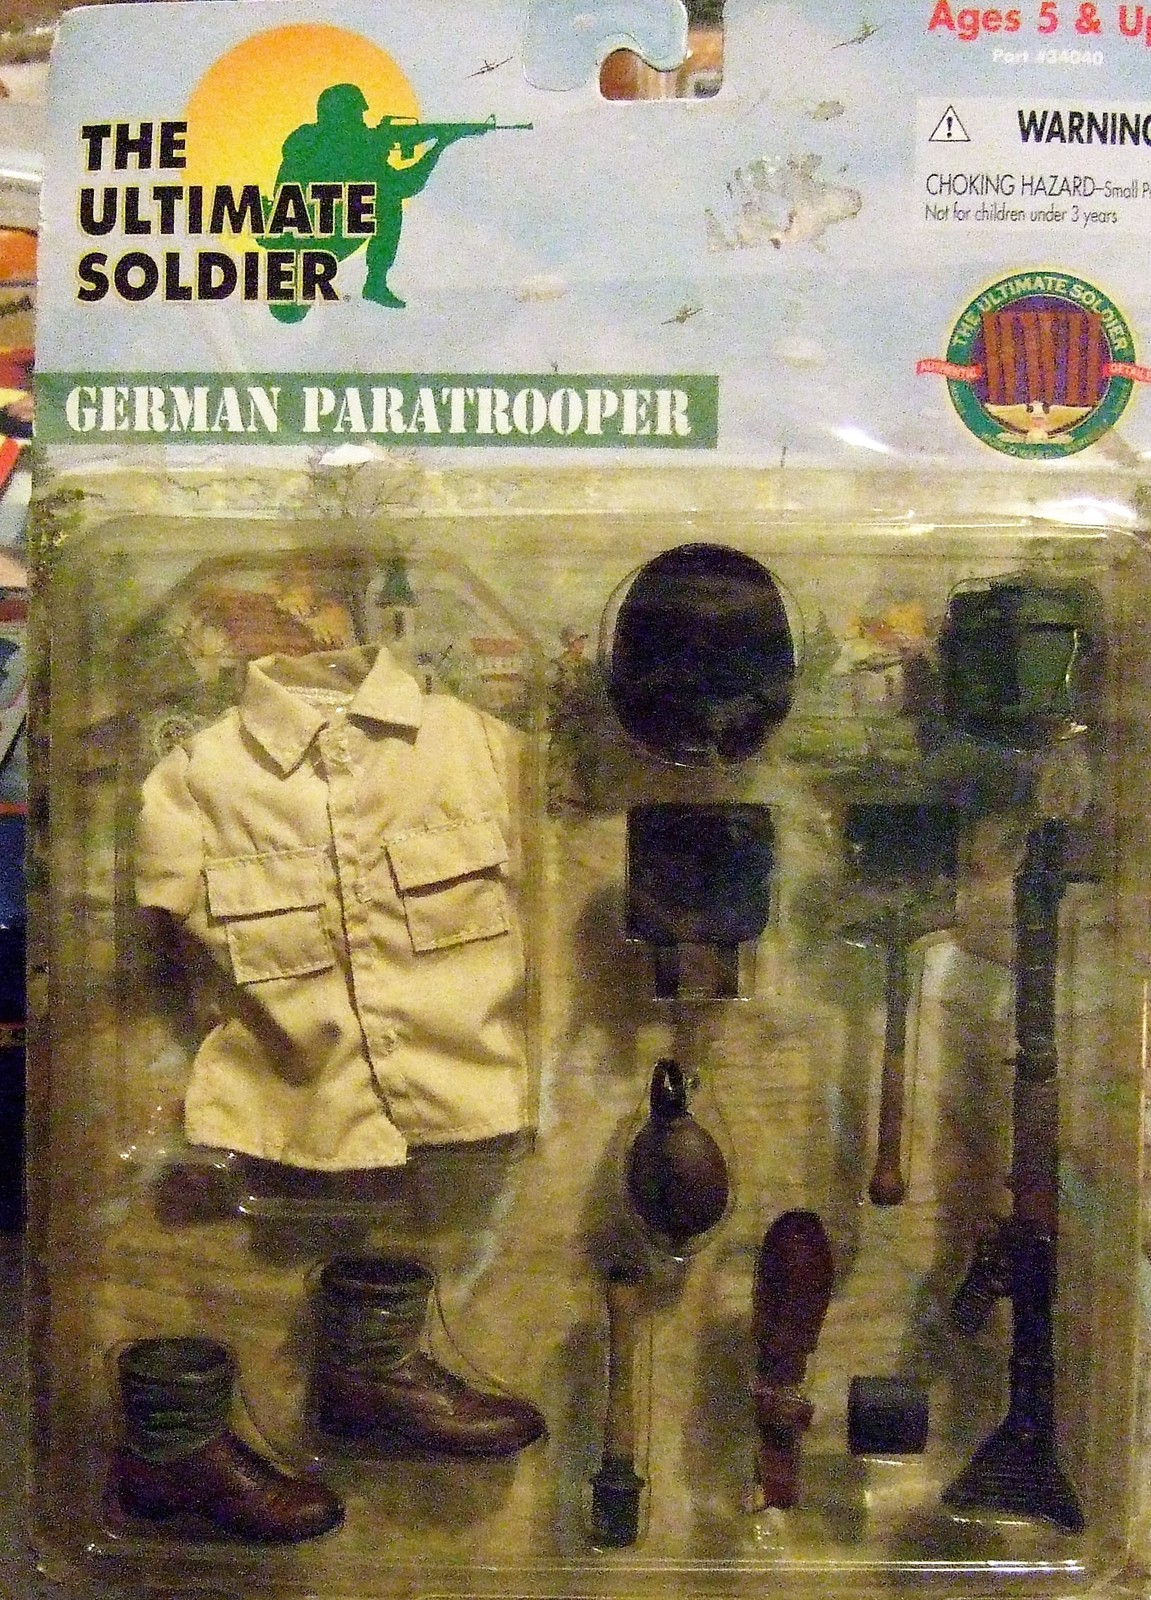 The Ultimate Soldier - German Paratrooper - Uniform and Equipment  - $9.00